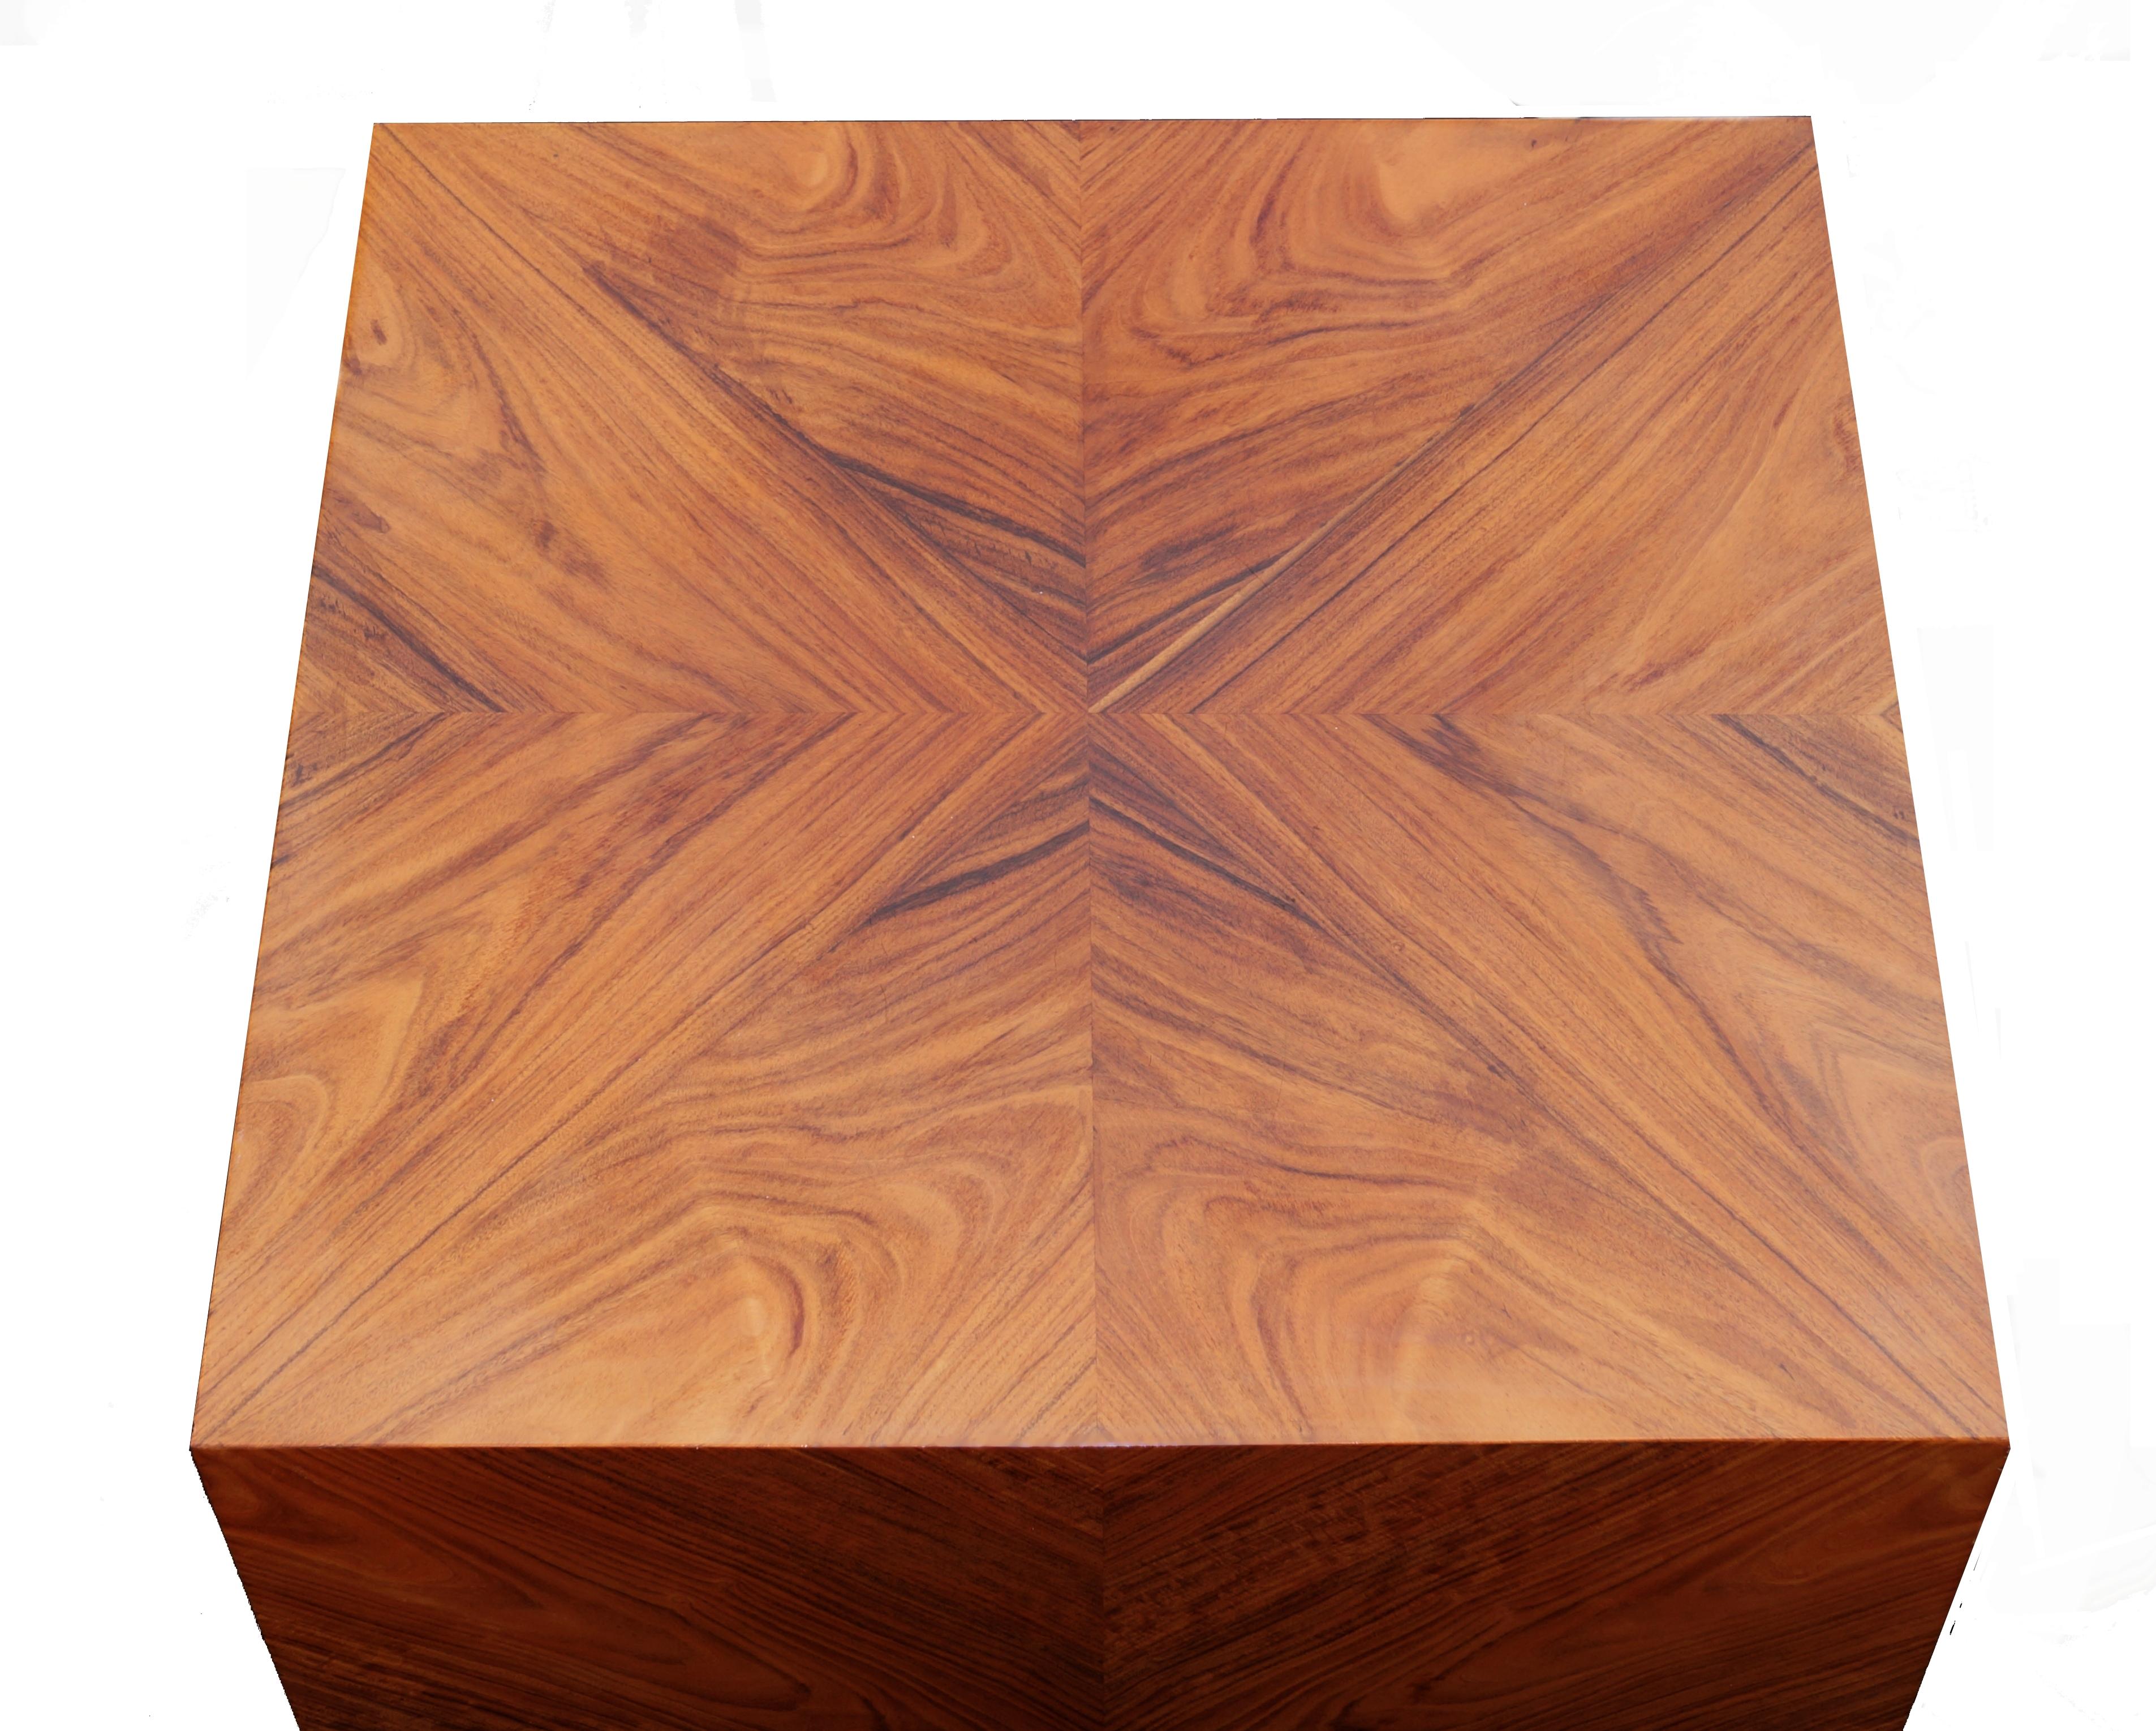 Late 20th Century Milo Baughman for Thayer Coggin Rosewood Bookmatched Side End Table Pedestal